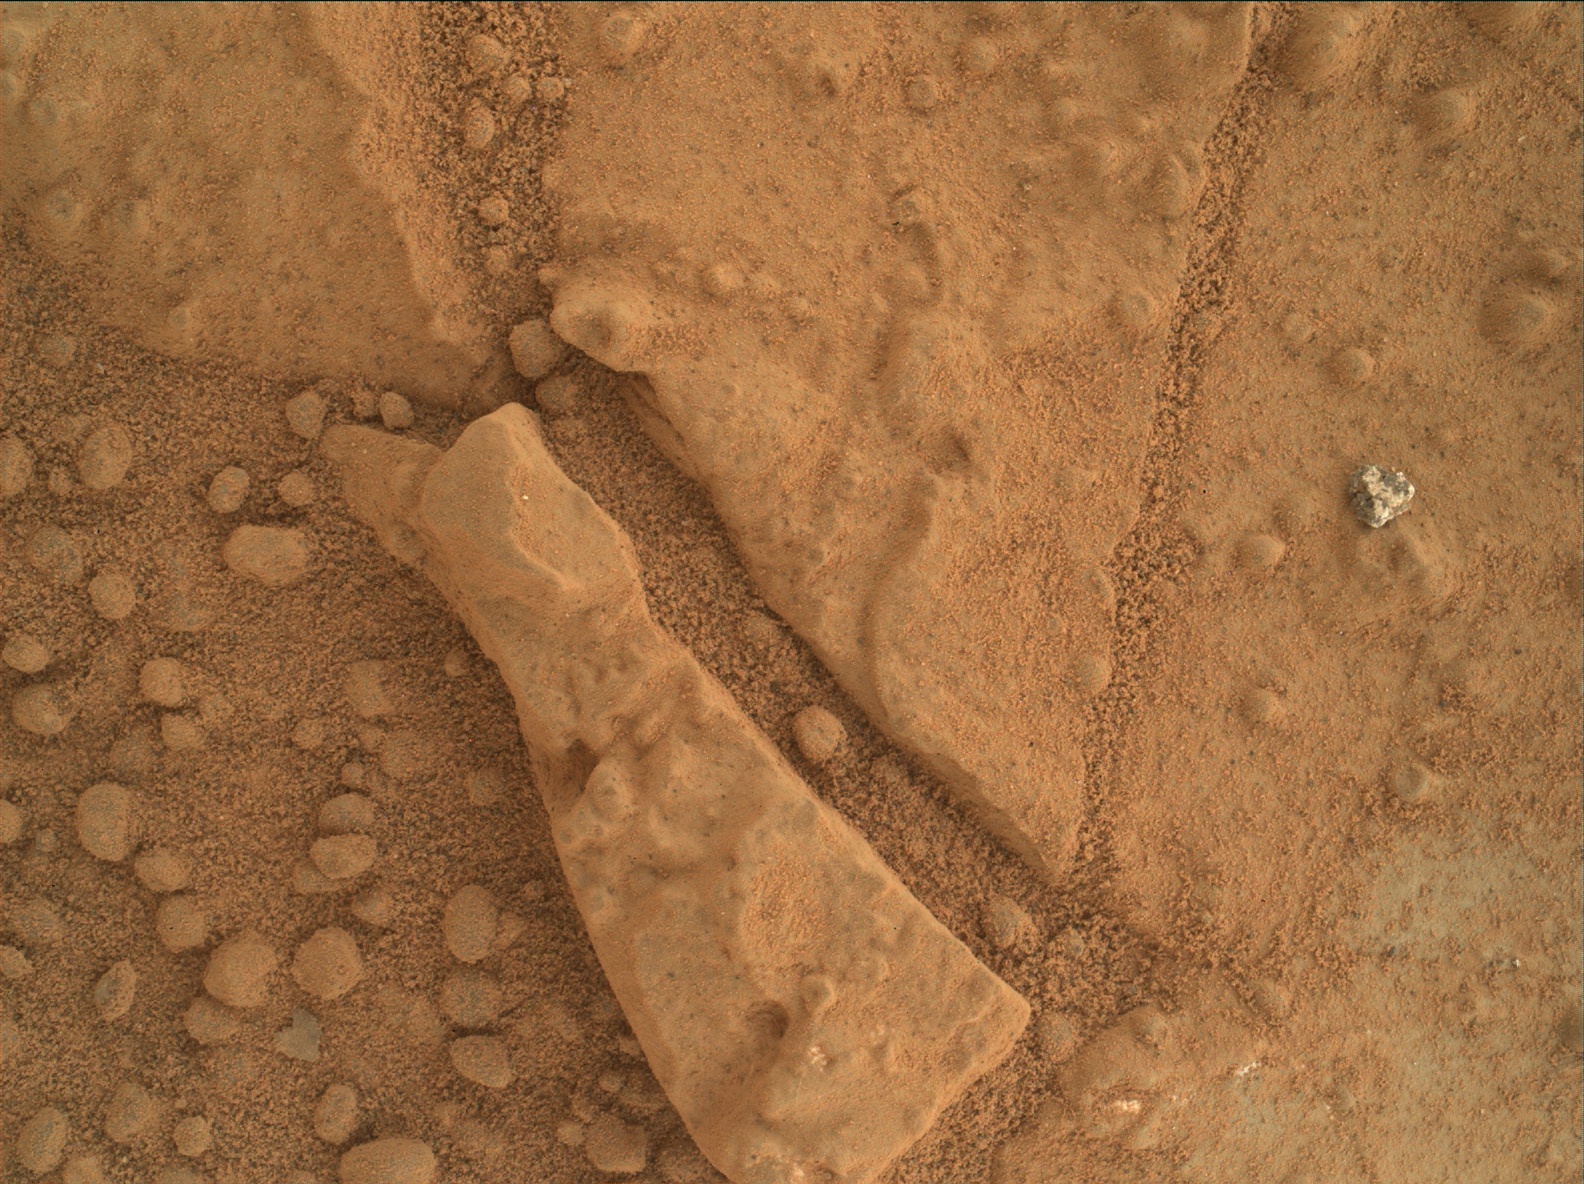 Nasa's Mars rover Curiosity acquired this image using its Mars Hand Lens Imager (MAHLI) on Sol 162